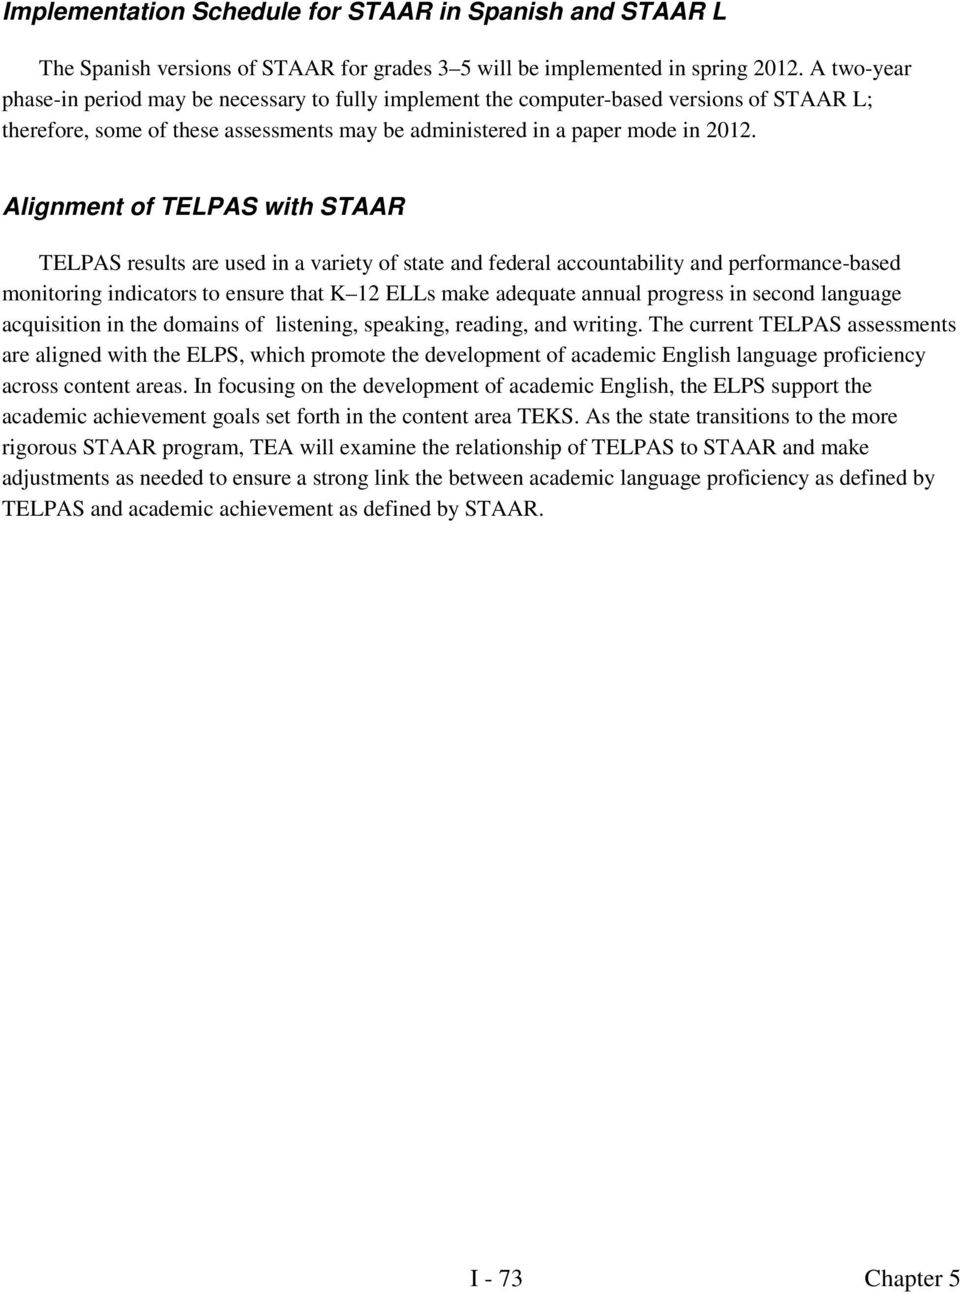 Alignment of TELPAS with STAAR TELPAS results are used in a variety of state and federal accountability and performance-based monitoring indicators to ensure that K 12 ELLs make adequate annual